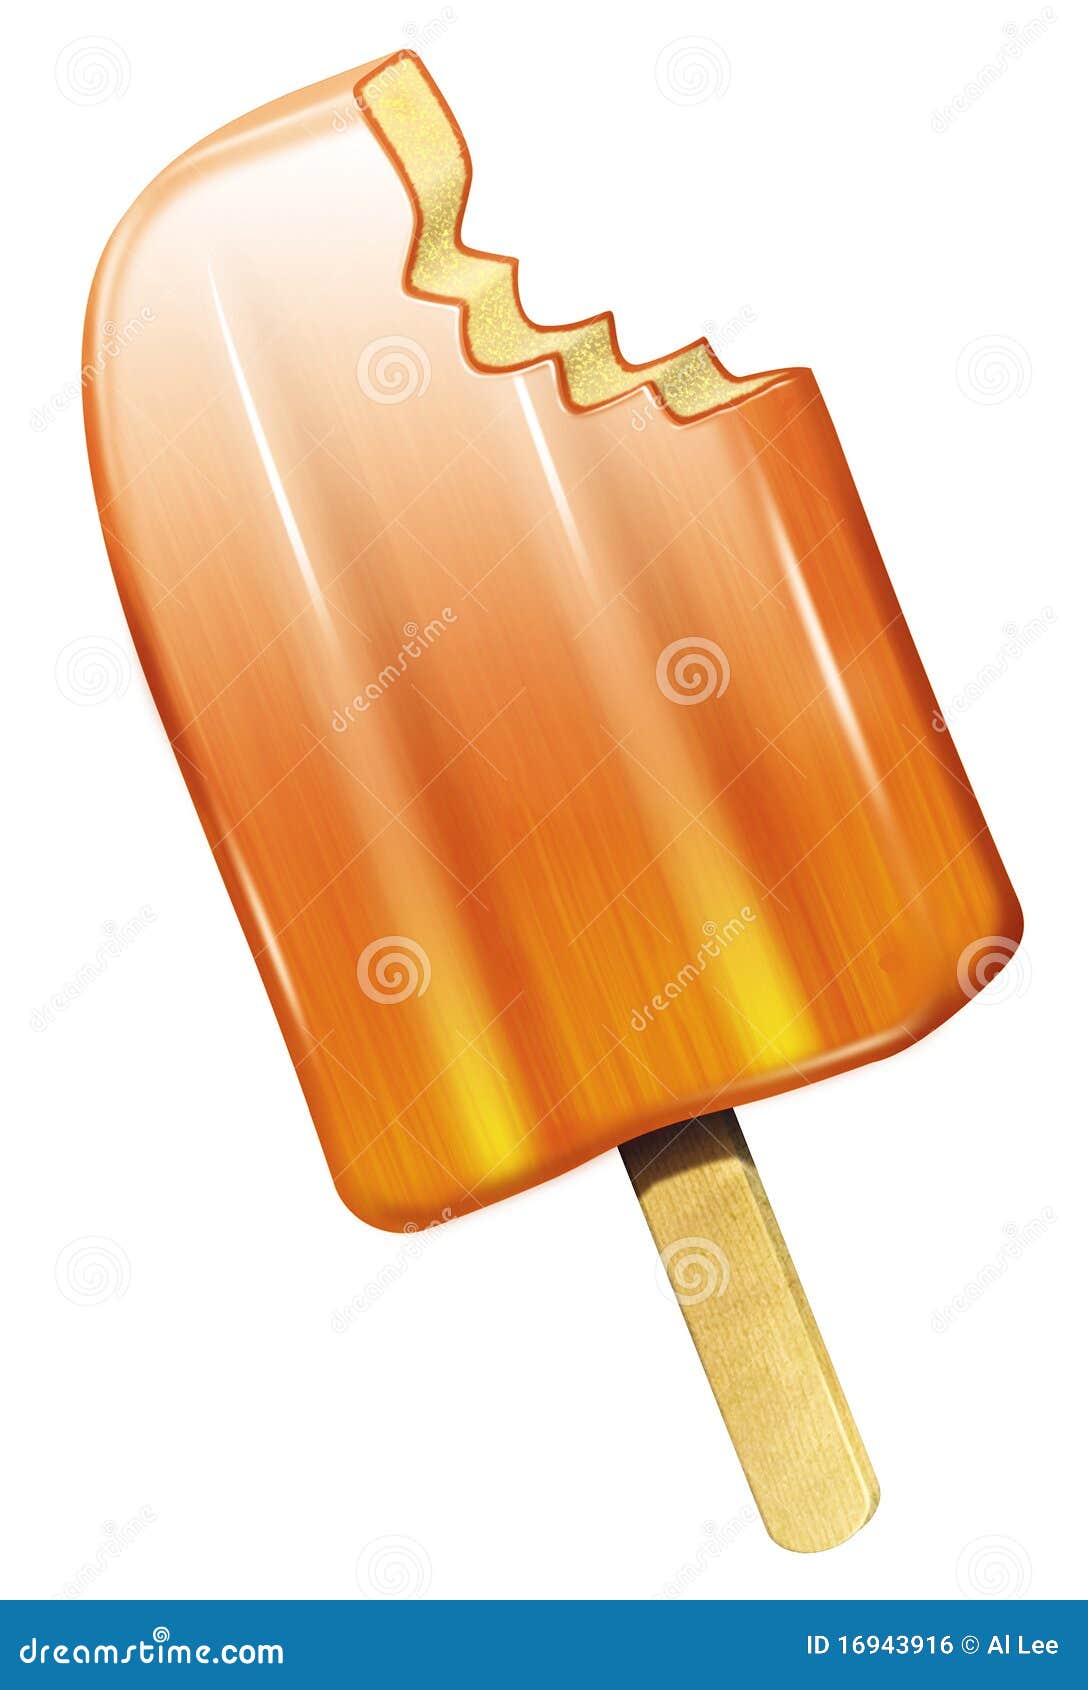 clipart ice lolly - photo #17